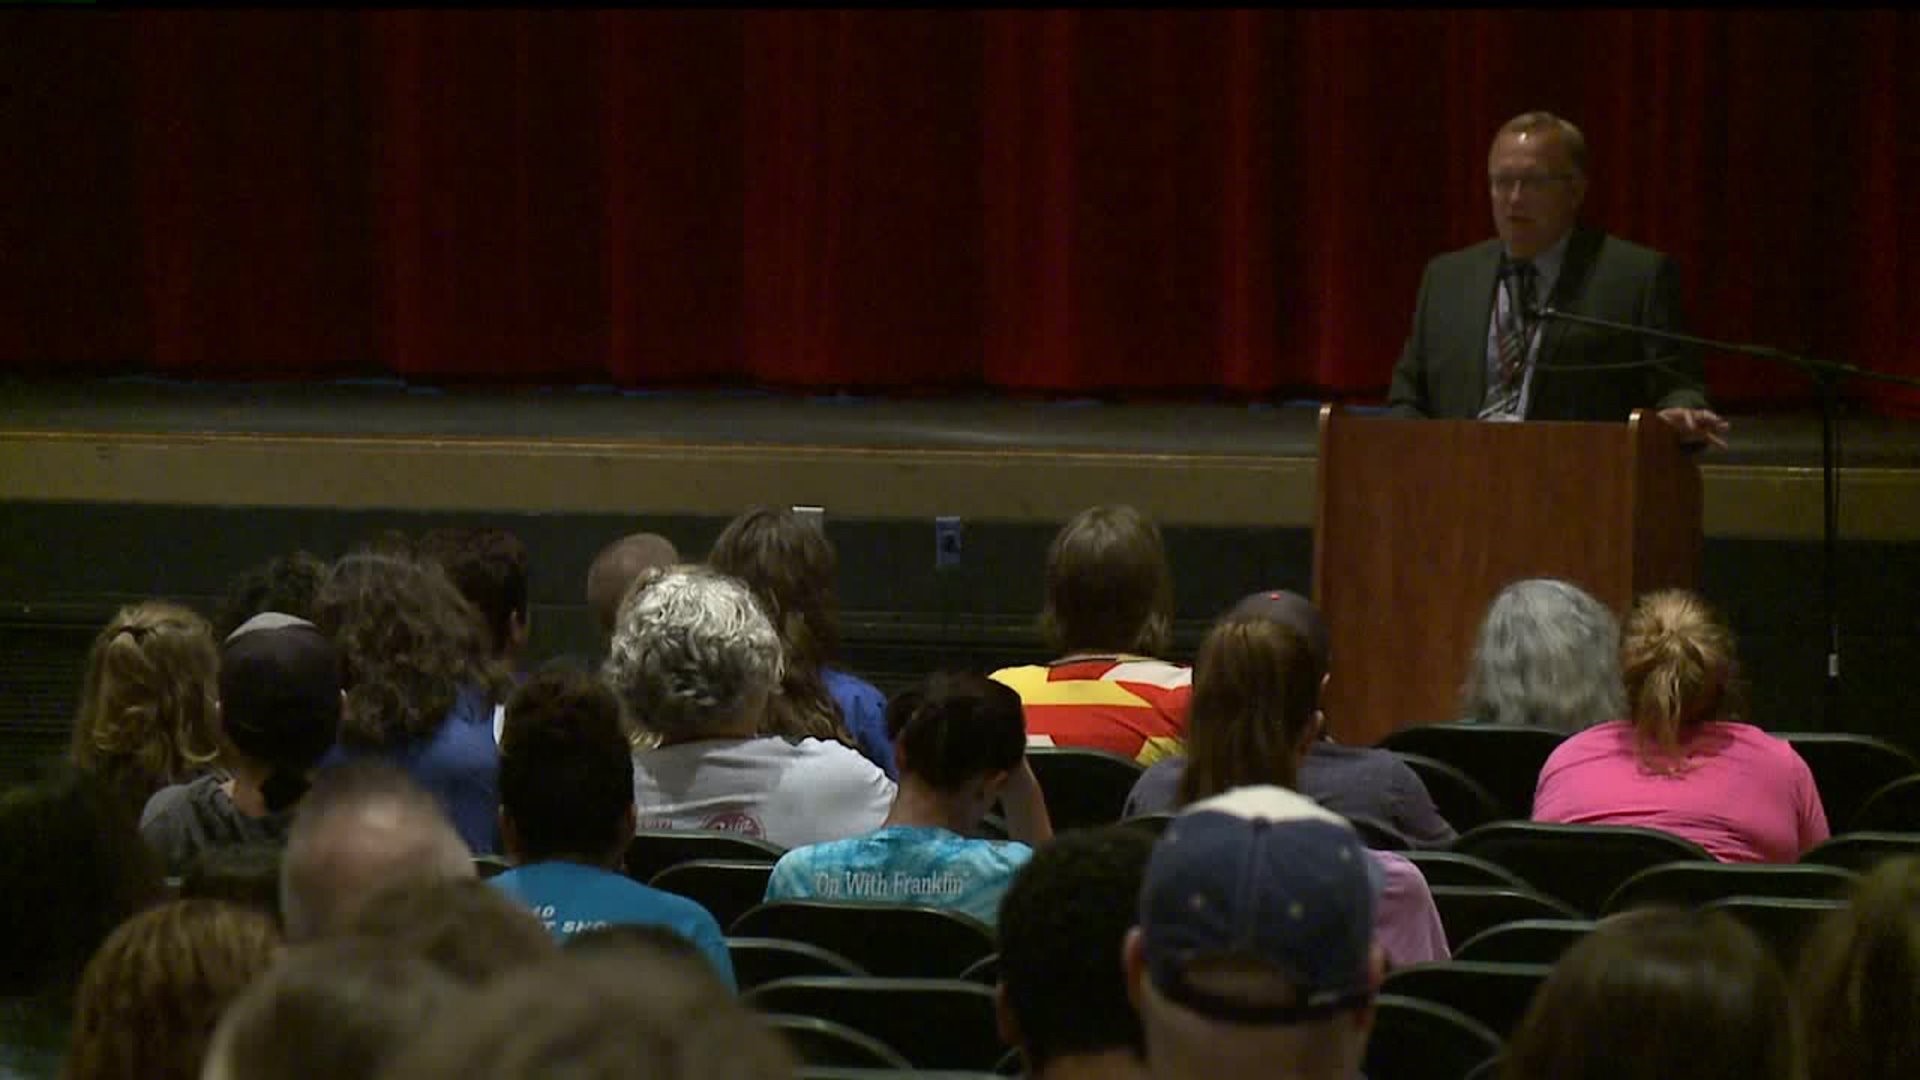 Moline superintendent asks for patience from parents